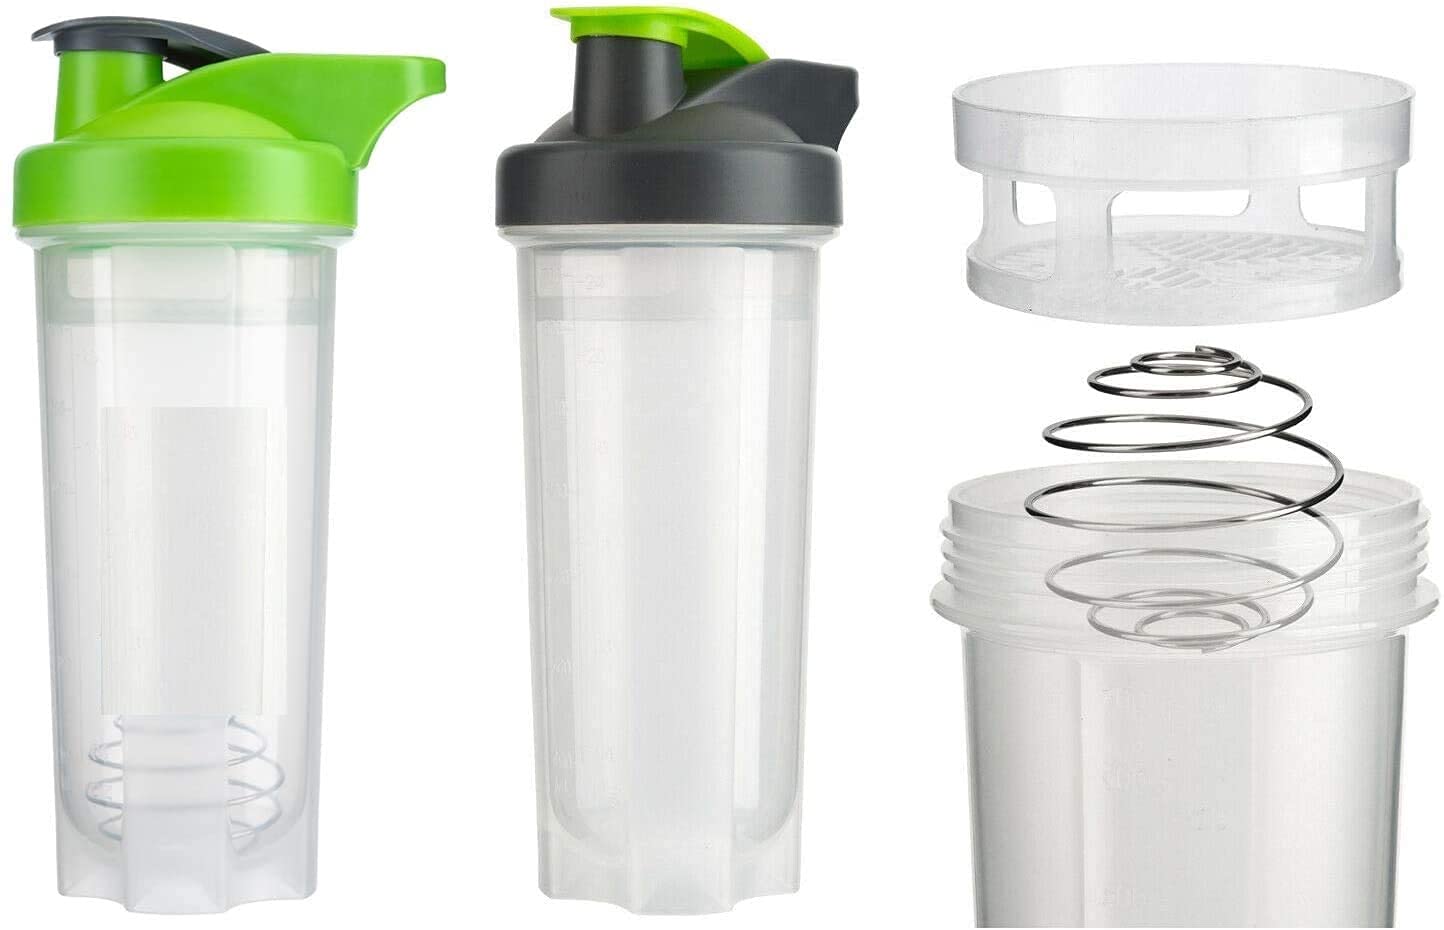 Glow Protein Shaker Bottle – Set of 2 Green Premium 700ml Sports Drinks Shake & Water – Gym Workout Indoor Outdoor Exercise – BPA Free Flip Lid Carry Handle Whisk Ball & Mixing Gauze for Smoother Mix